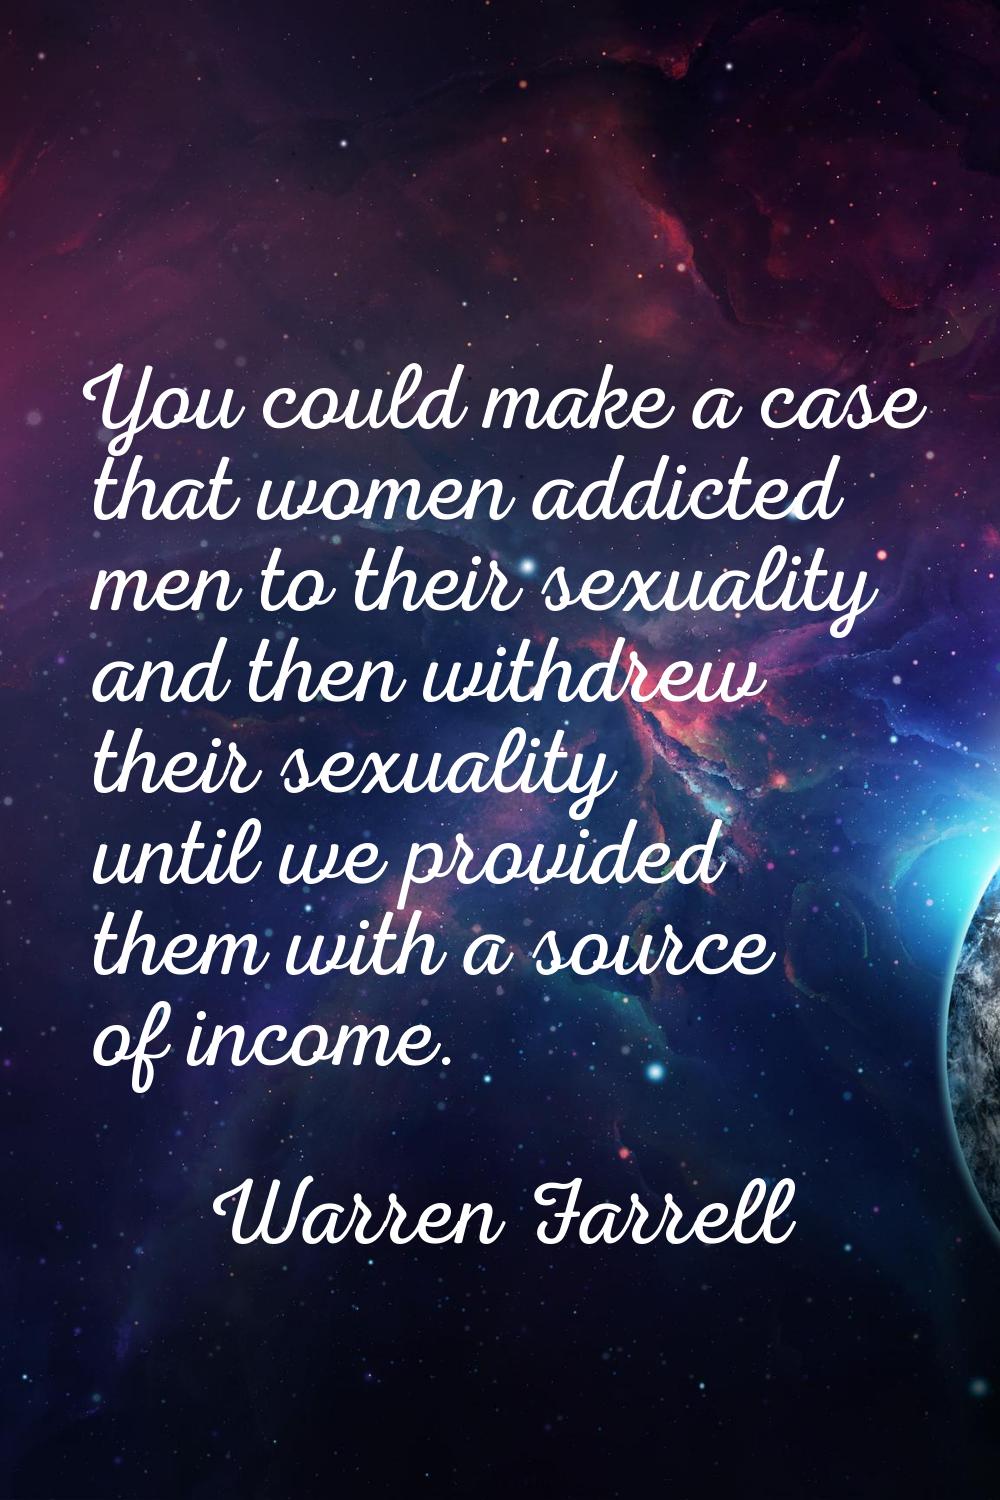 You could make a case that women addicted men to their sexuality and then withdrew their sexuality 